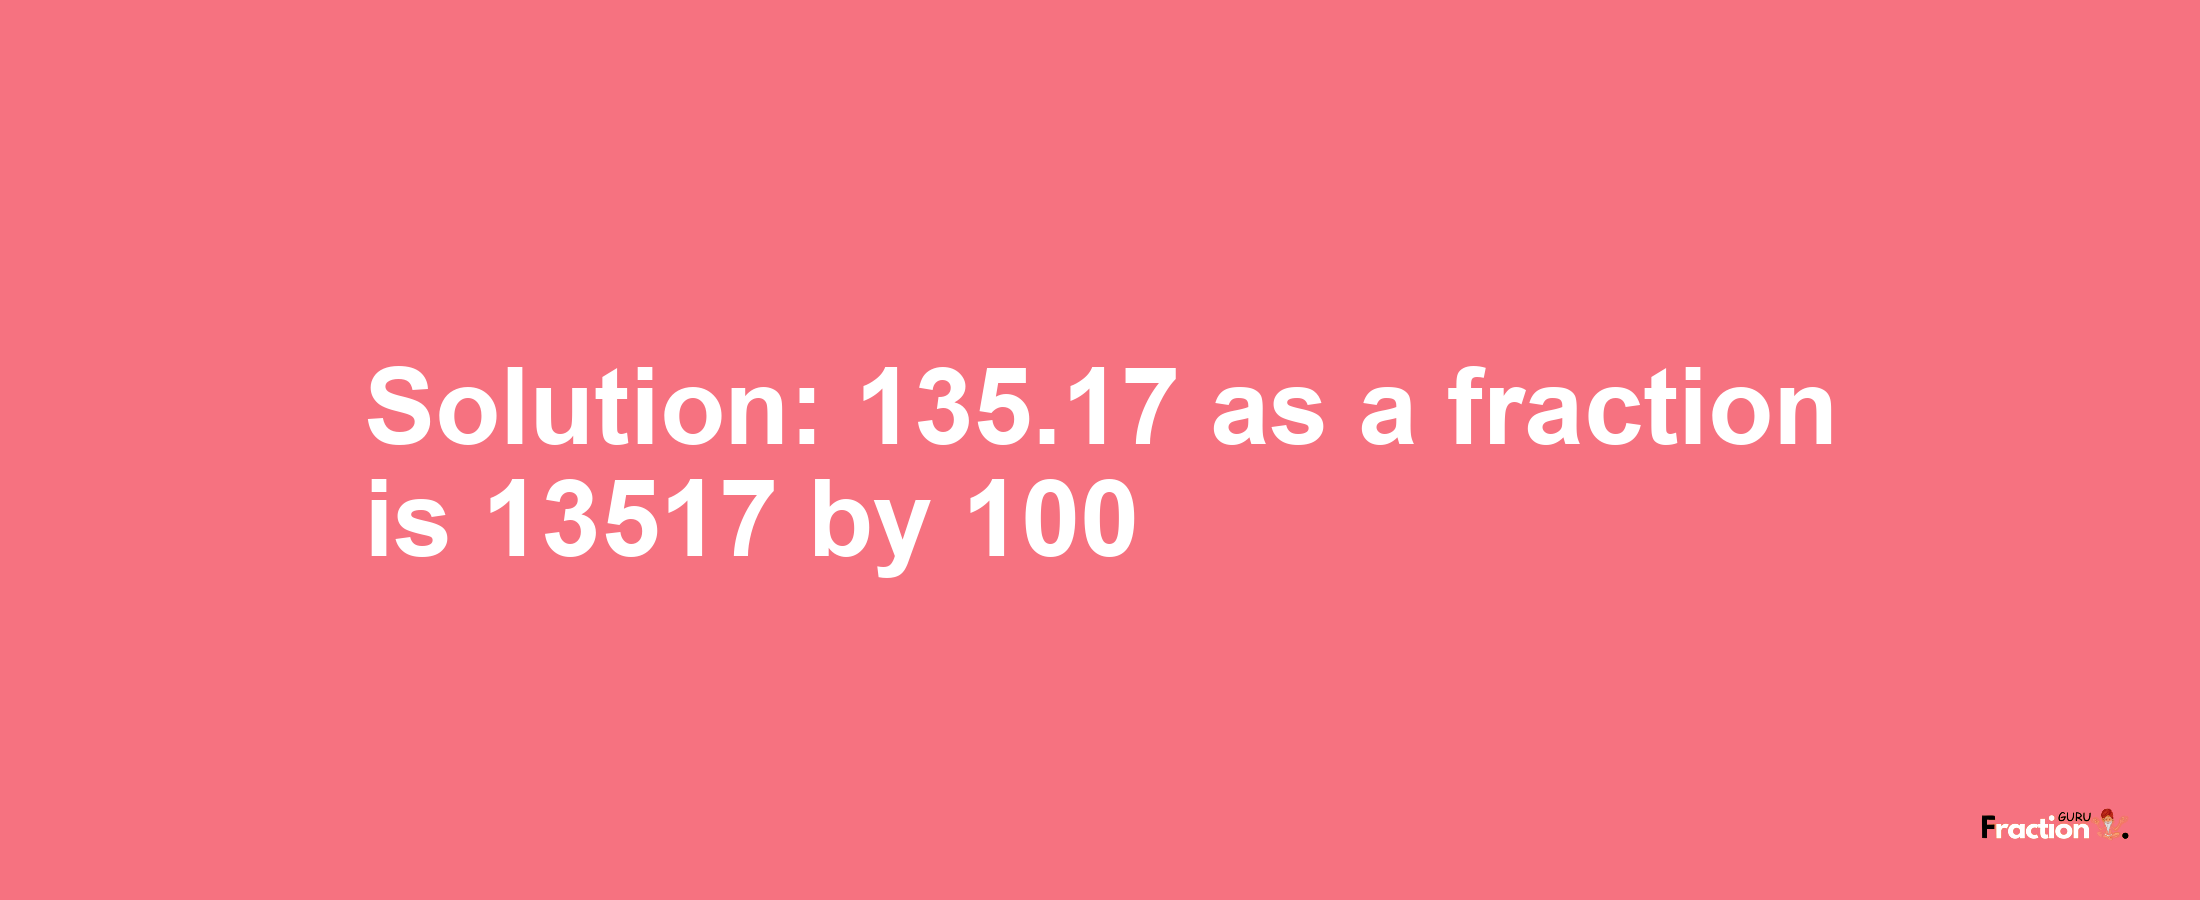 Solution:135.17 as a fraction is 13517/100